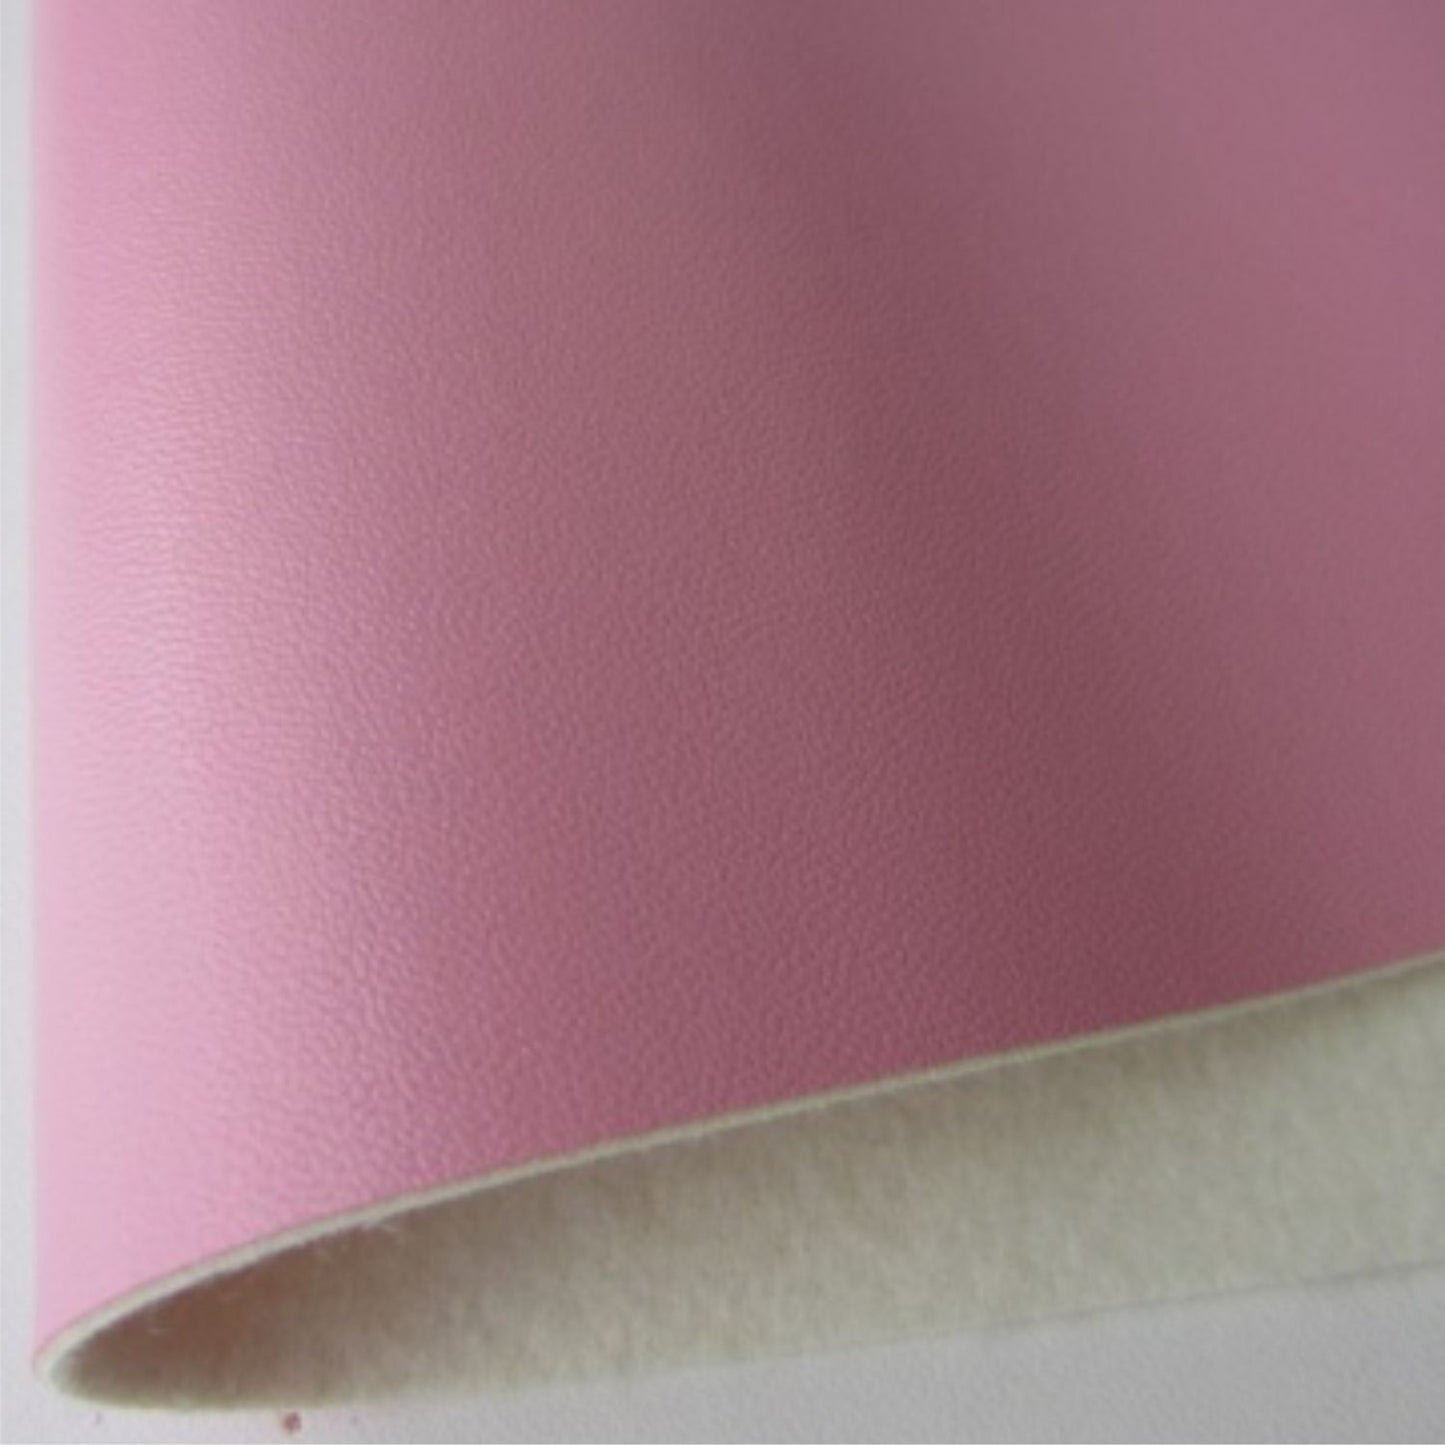 Bubble Gum Pink Smooth Fabric Synthetic Faux PU Leather 11.75in x 12in Sheets - CraftCutterSupply.com